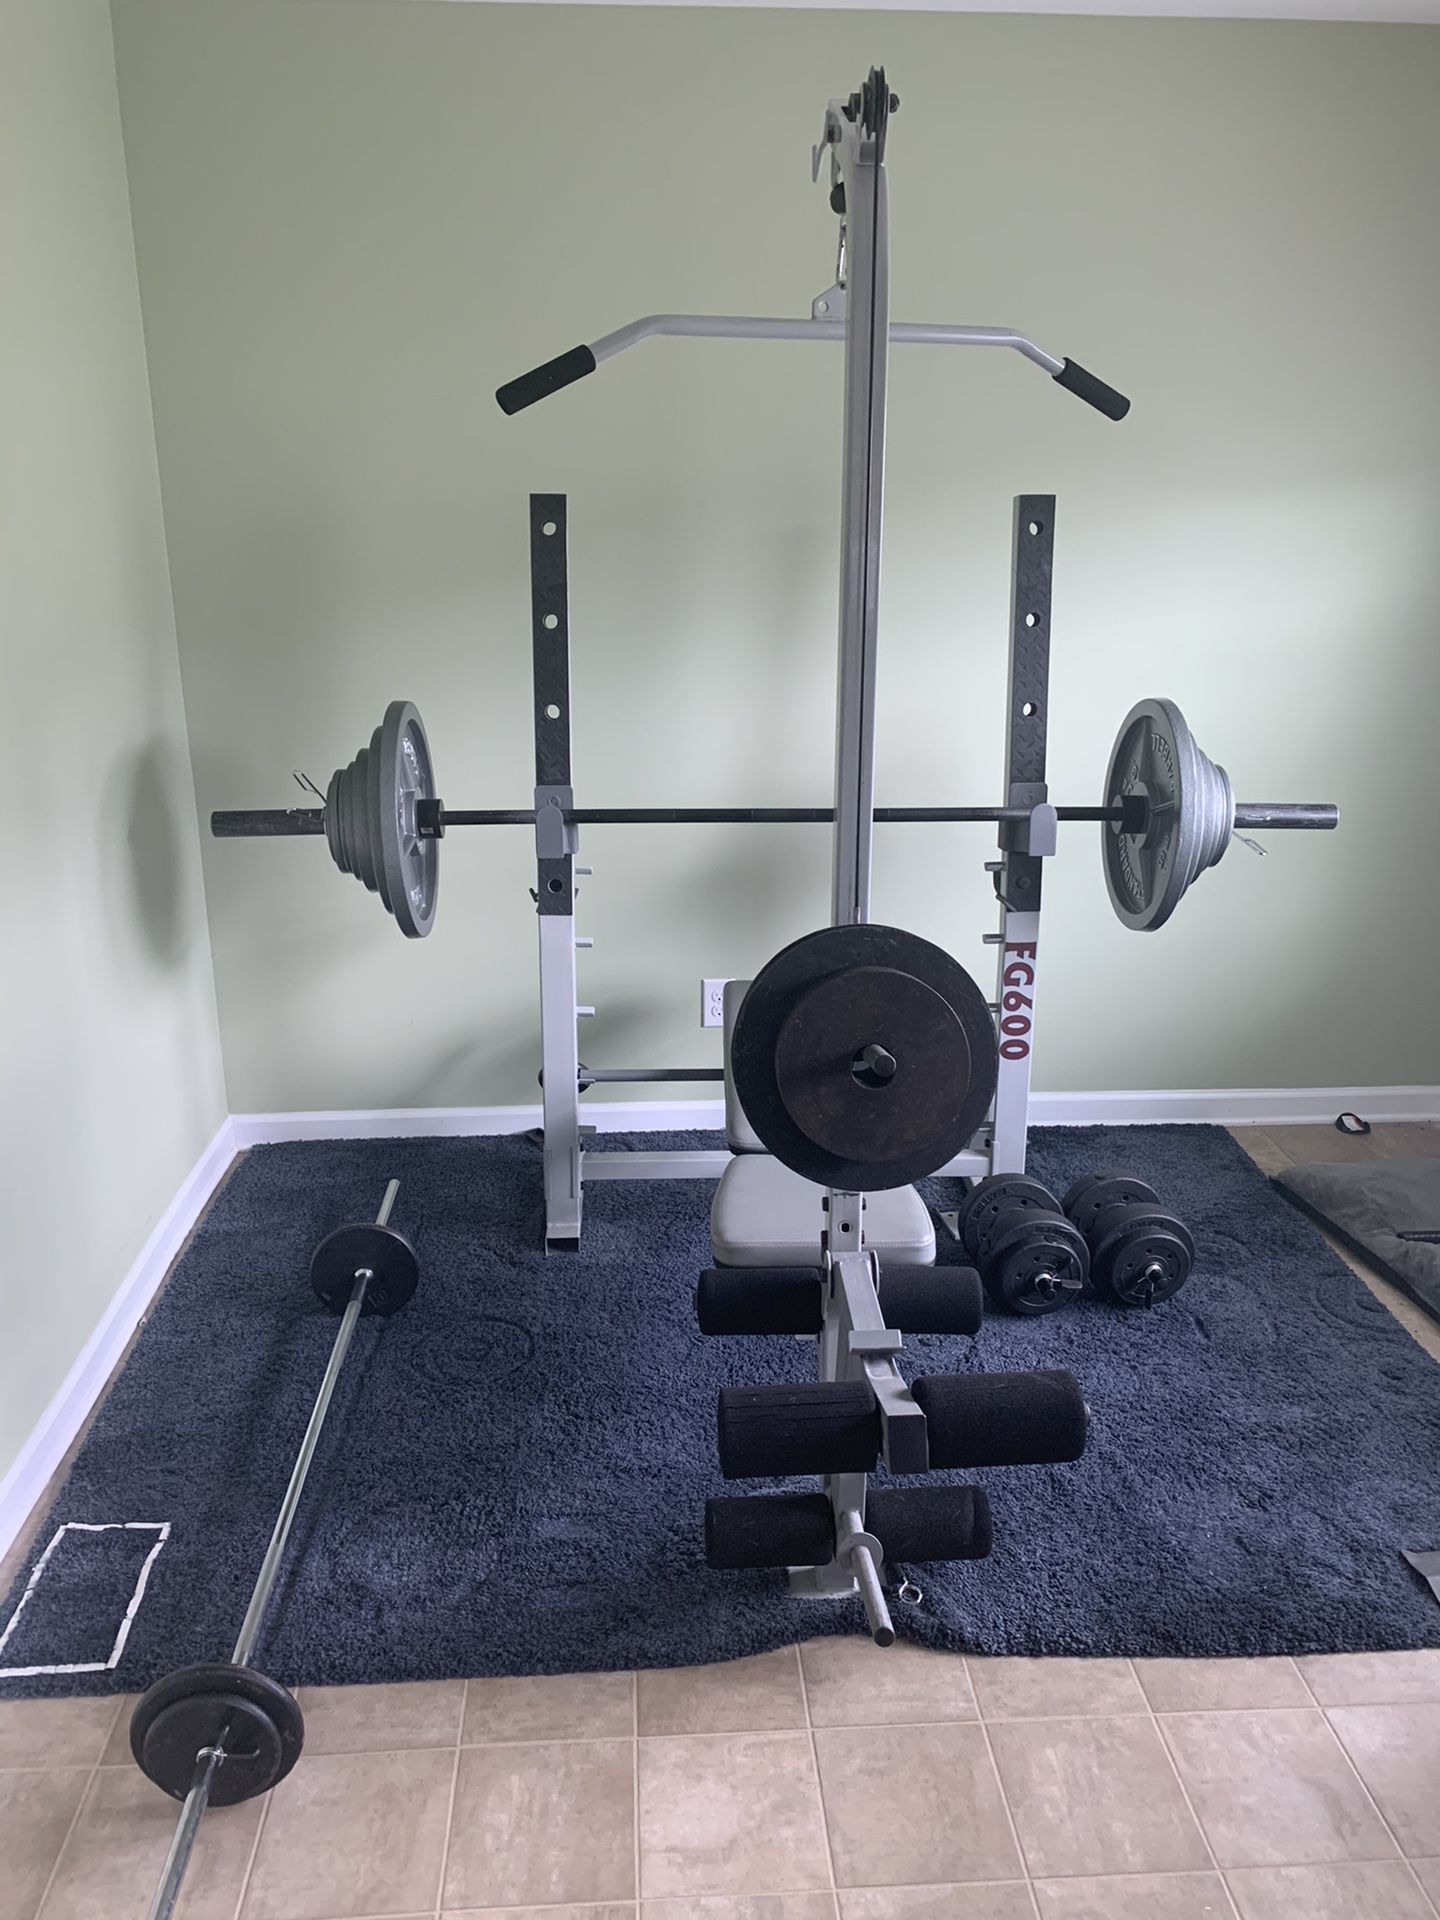 FG 600 Olympic Power Bench with Squat Rack